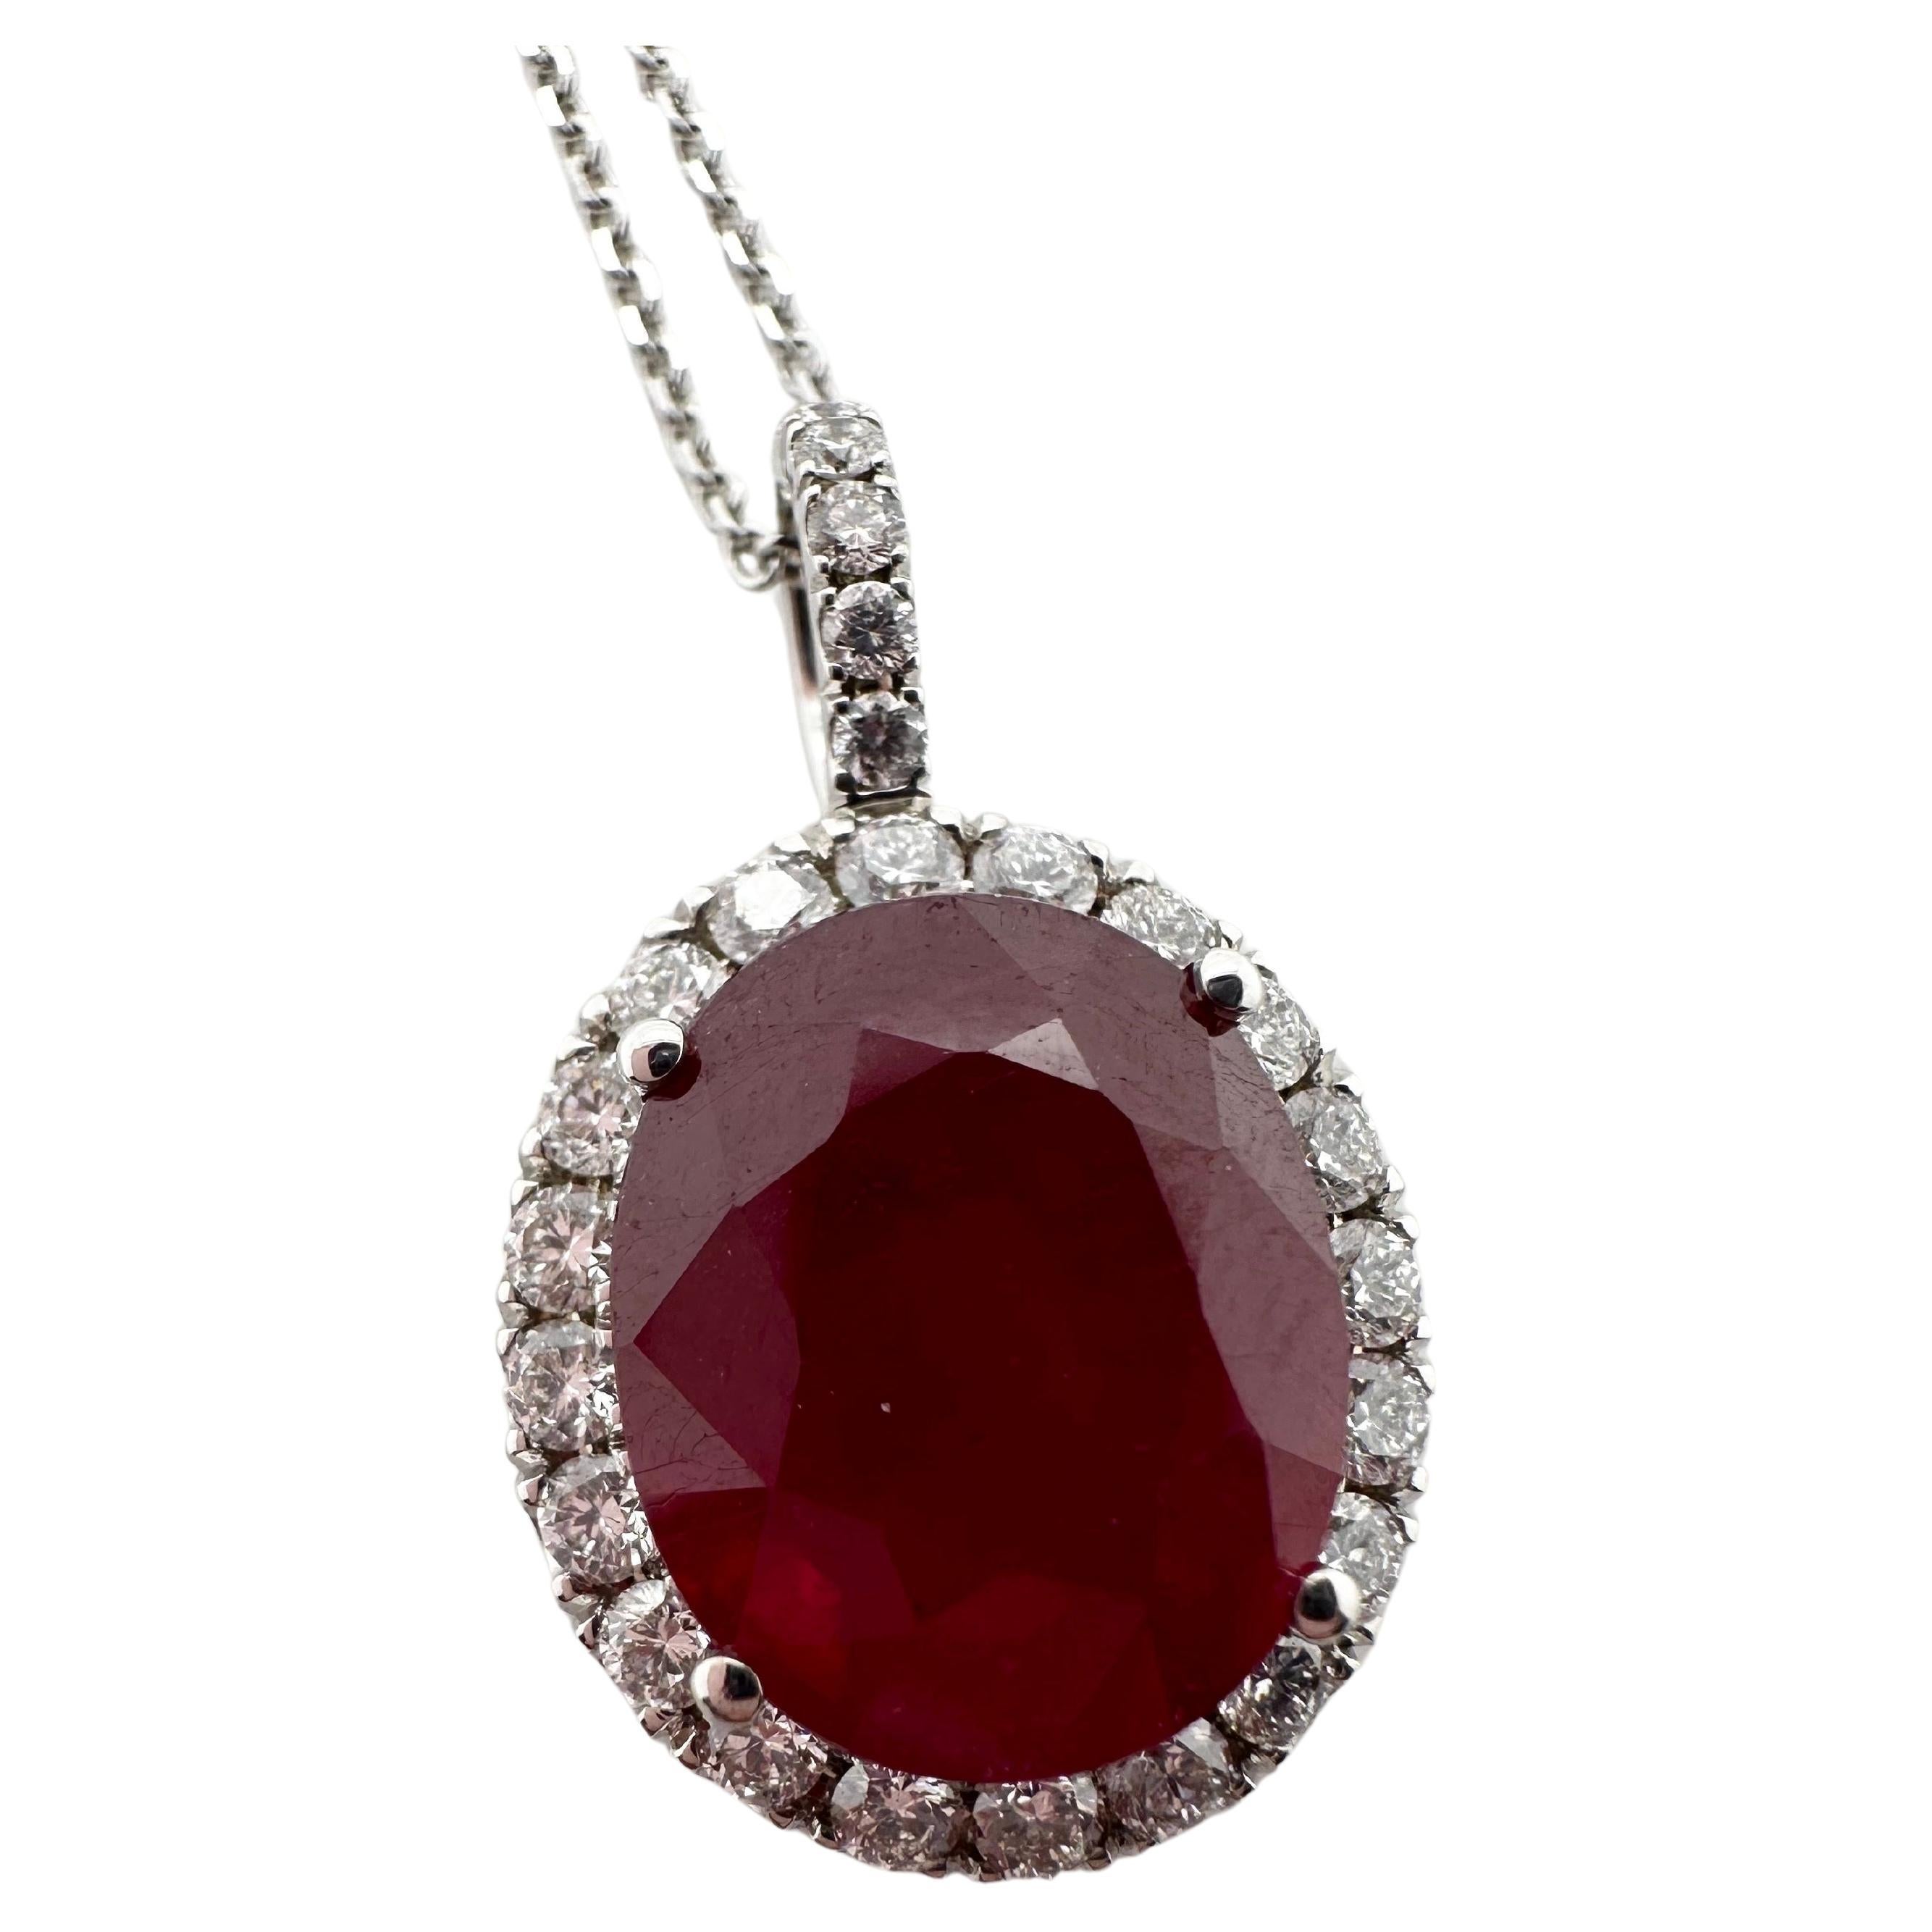 Collier pendentif ovale rubis diamant or 18KT